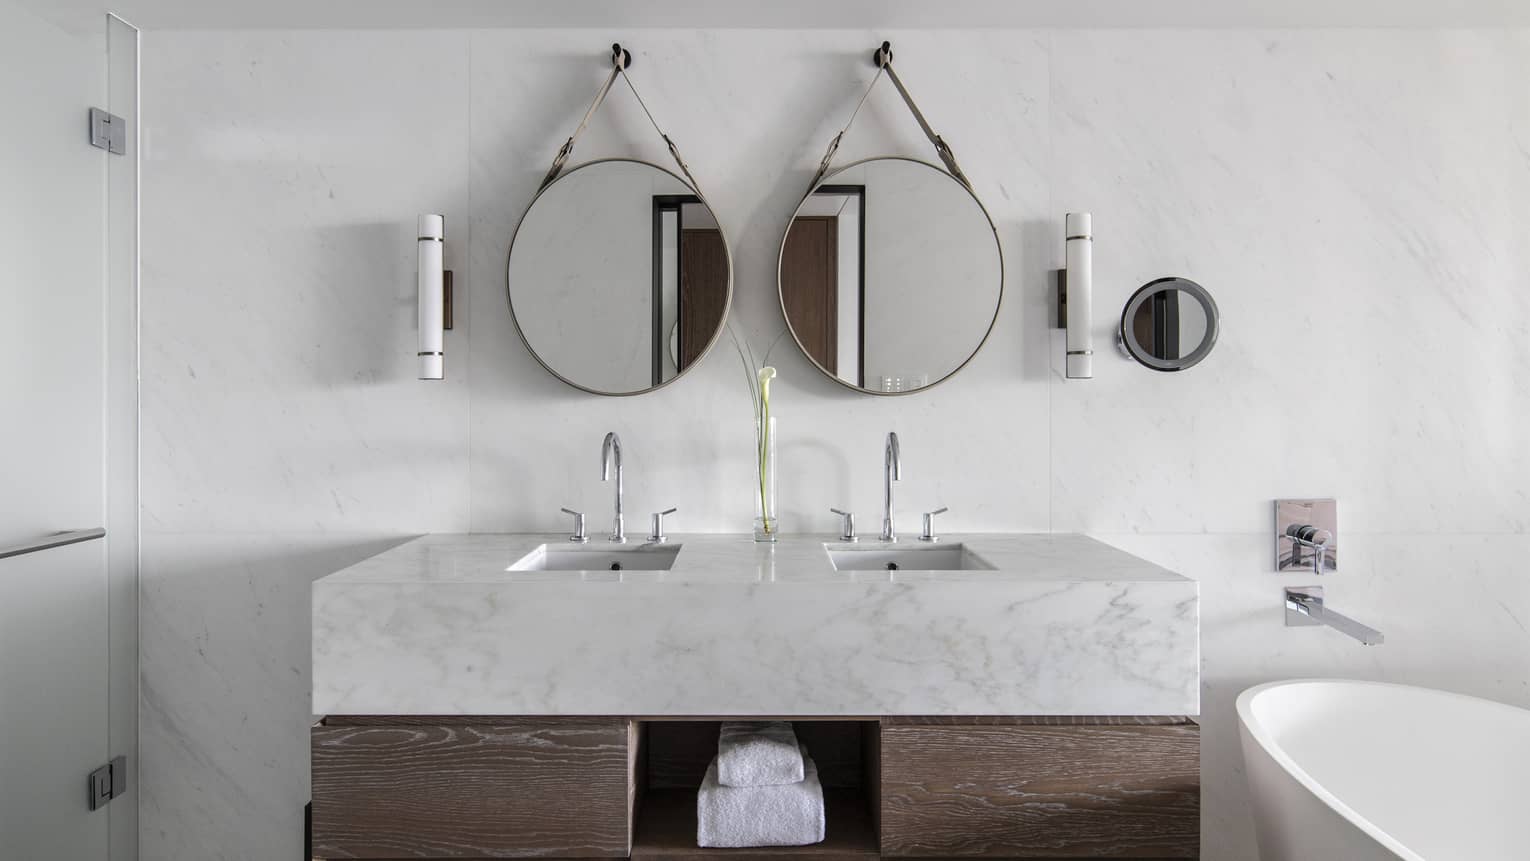 Bathroom with marble and wood vanity, two round mirrors, white tub